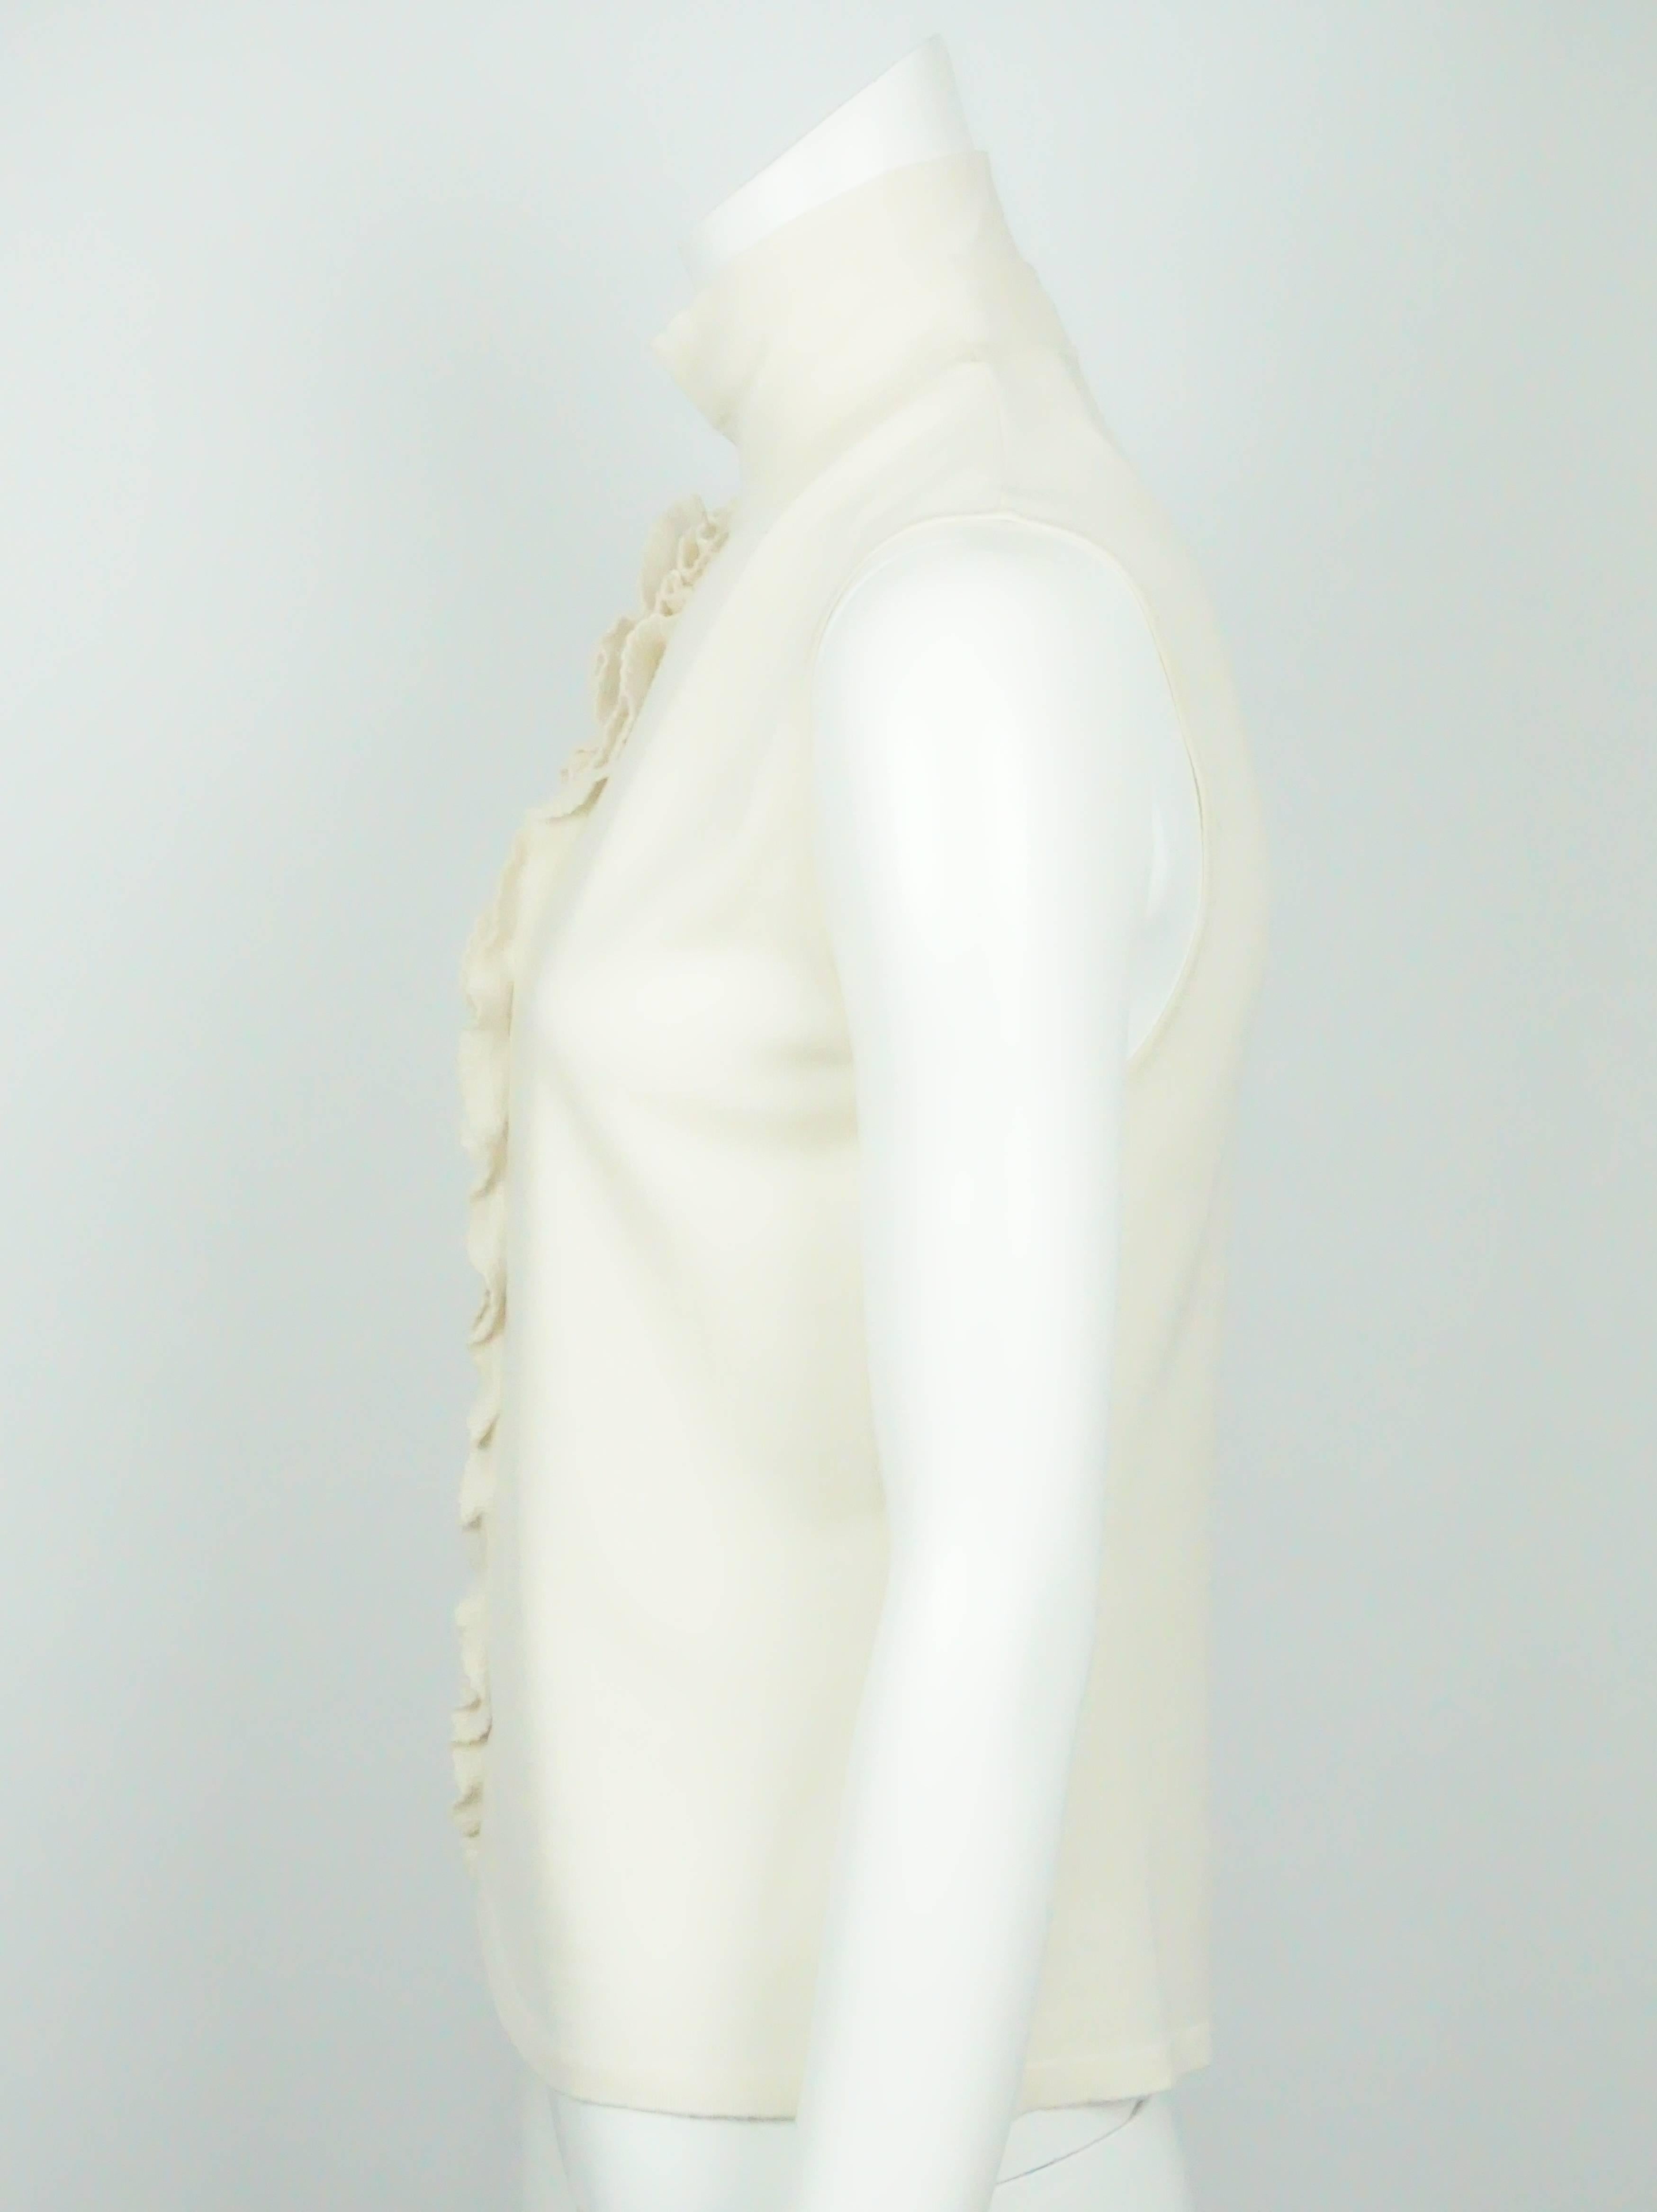 Valentino Cream Knit Sleeveless Top - Medium  This beautiful fleece wool top is in excellent condition. The top has a turtle neck collar and has no sleeves. It is embellished with a beautiful floral detail which is made of kit material and has a